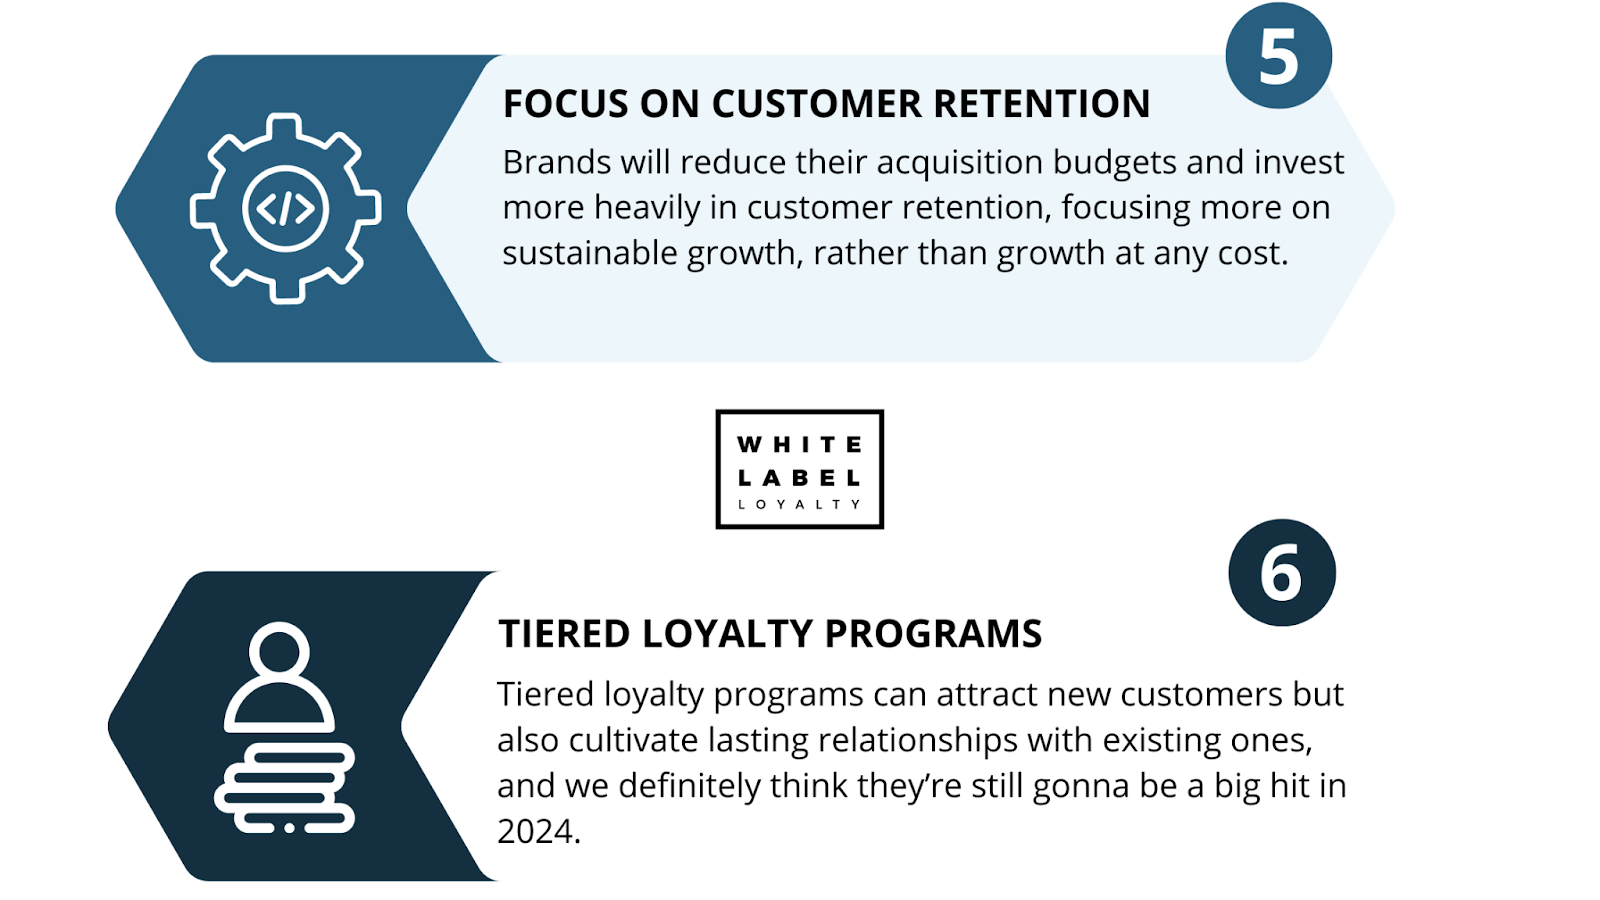 Customer loyalty trends in 2024: focusing on customer retention and tiered loyalty programs.